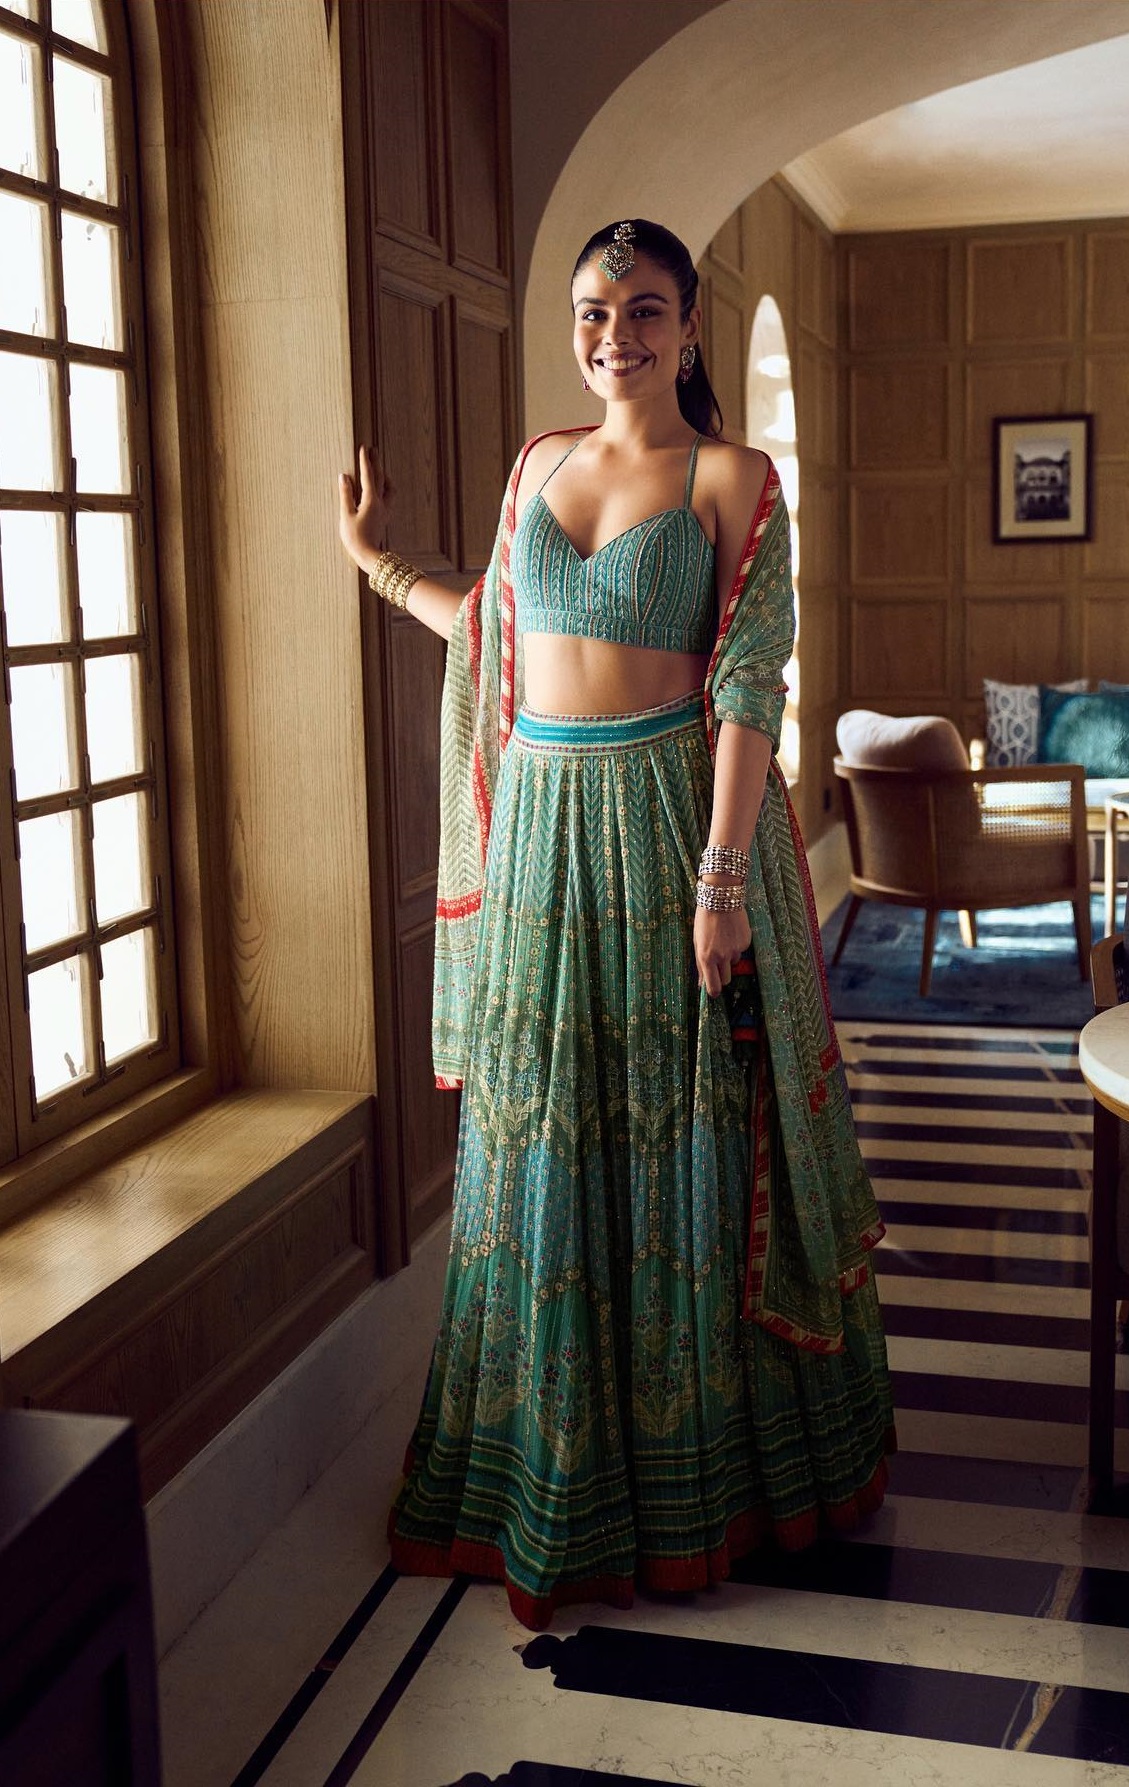 ‘Homage’ By Anita Dongre Is An Ode To The Wearer’s Inclusivity And India’s Architectural History!